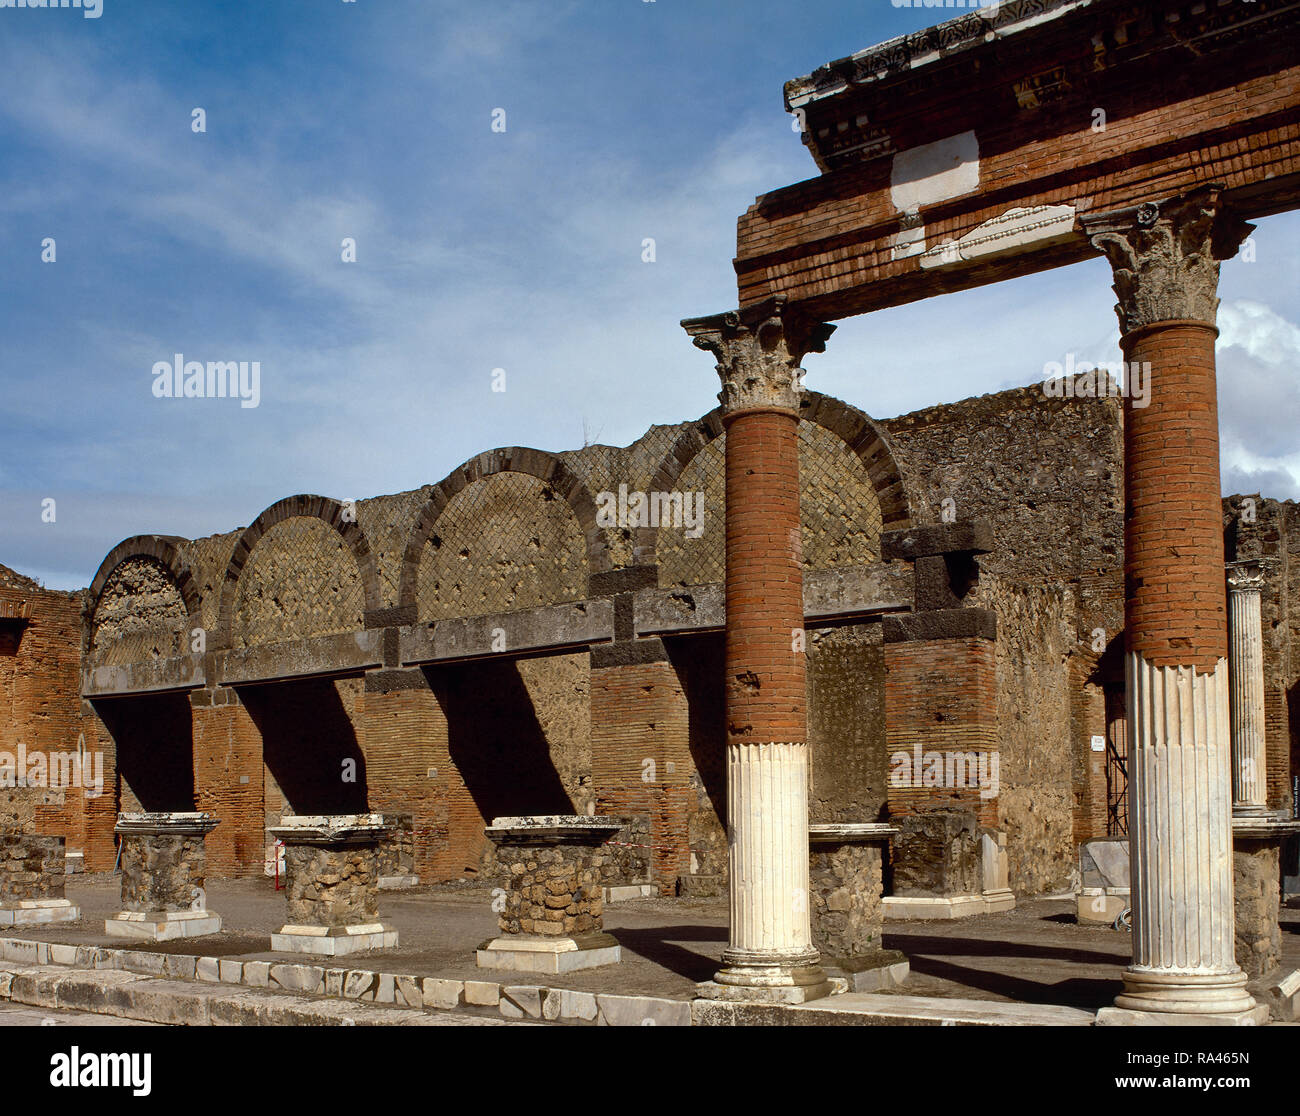 Italy. Pompeii. The Macellum , the public food market, in the north-east corner of the Forum. This complex was built in the imperial age. There was a large number of shops. View of one of the three entrances. Campania. Stock Photo